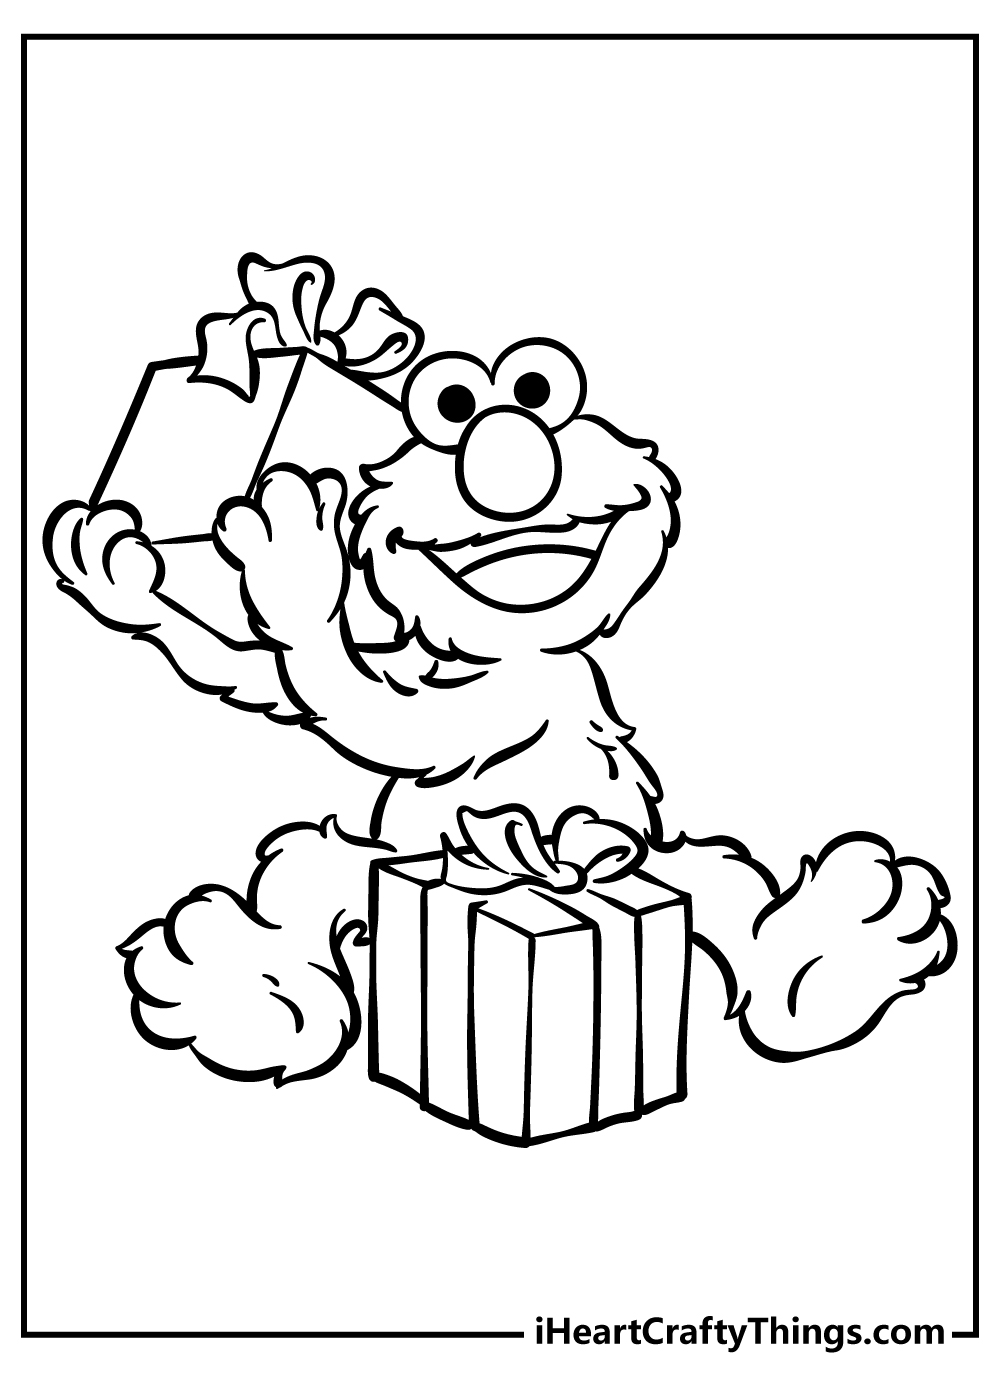 Printable Sesame Street Coloring Pages (Updated 2022)